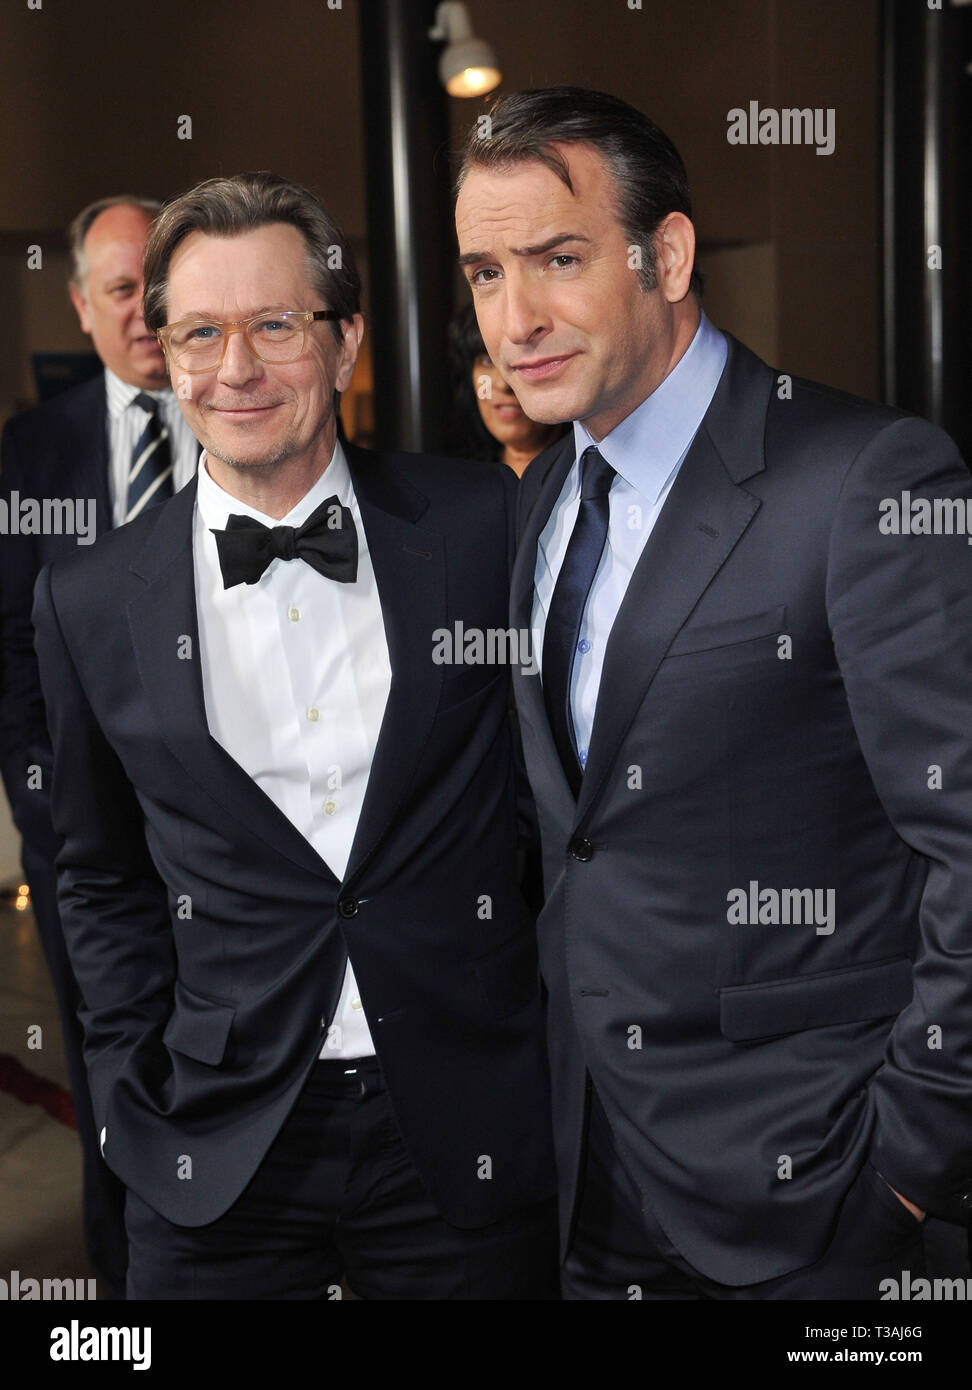 Gary Oldman and Jean Dujardin at The DGA-Awards 2012 at the Kodak Theatre  In Los Angeles.Gary Oldman and Jean Dujardin 157 Event in Hollywood Life -  California, Red Carpet Event, USA, Film